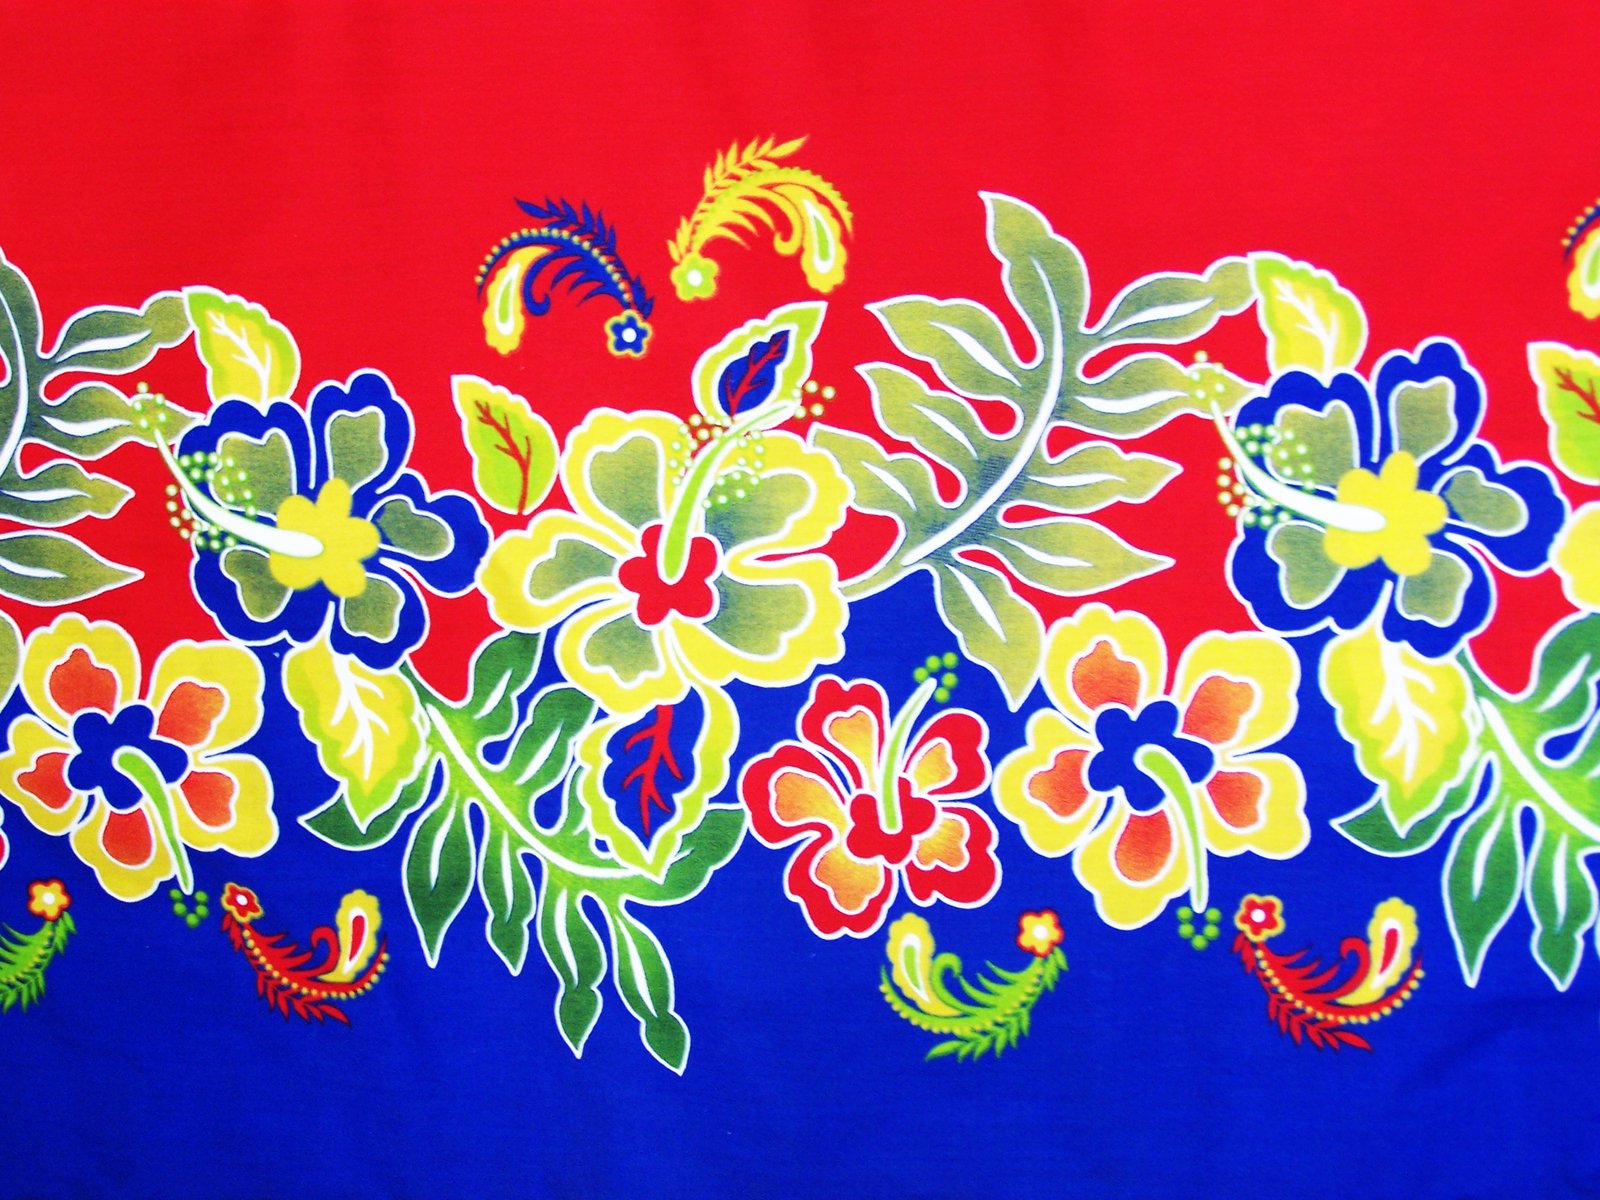 a painting shows a bright blue background with colorful flowers and leaves